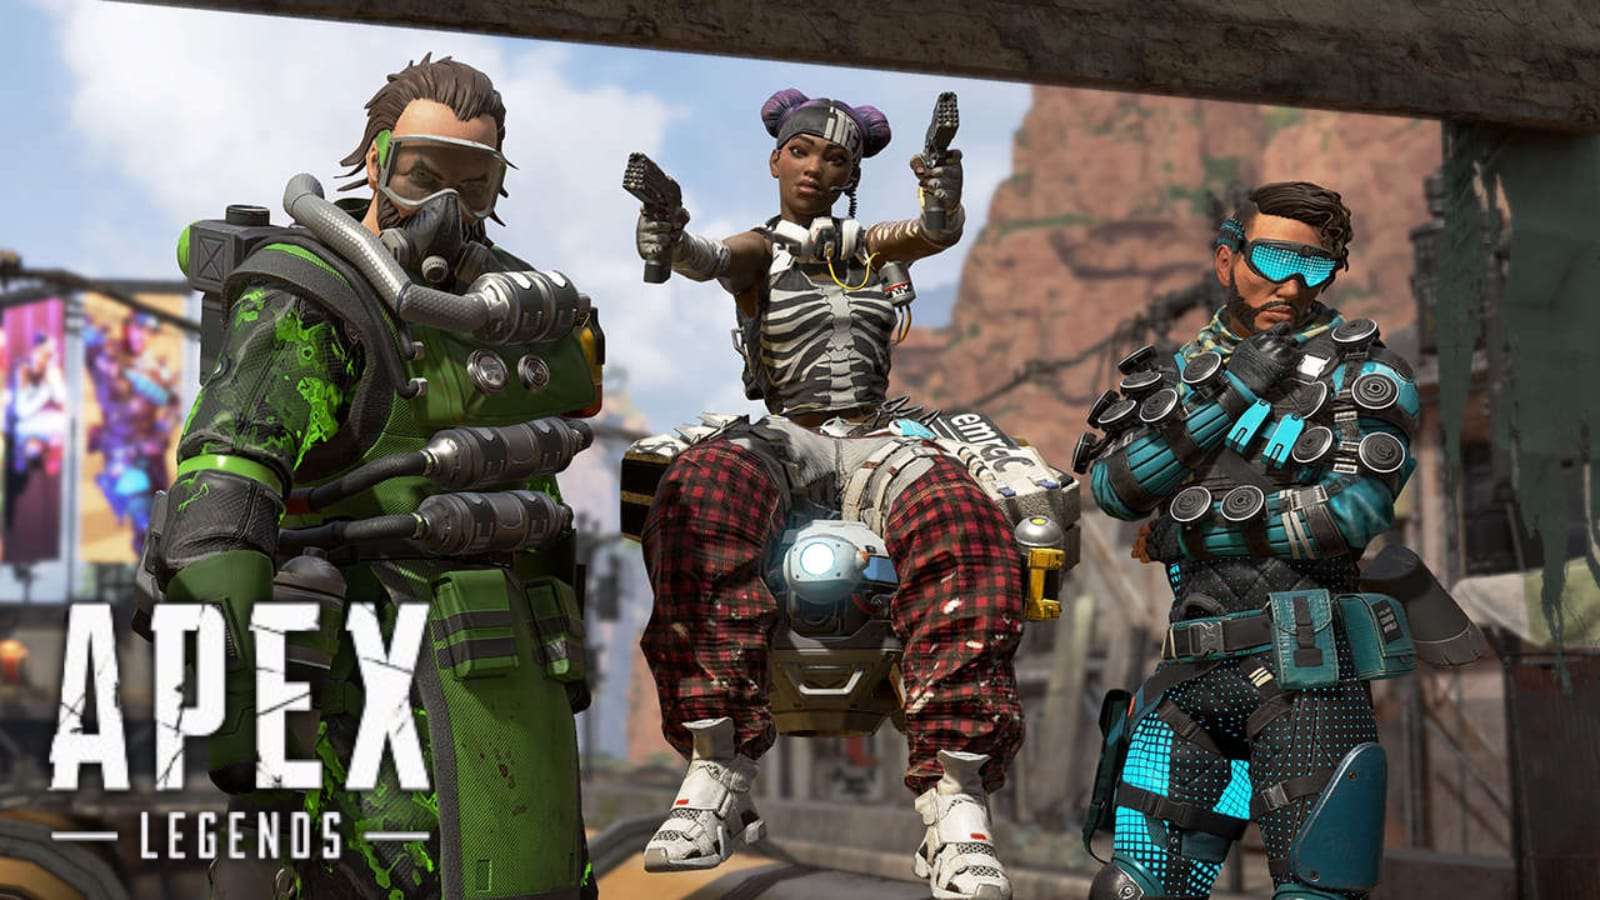 Apex Legends players flame Respawn for "embarrassing" effort on skins